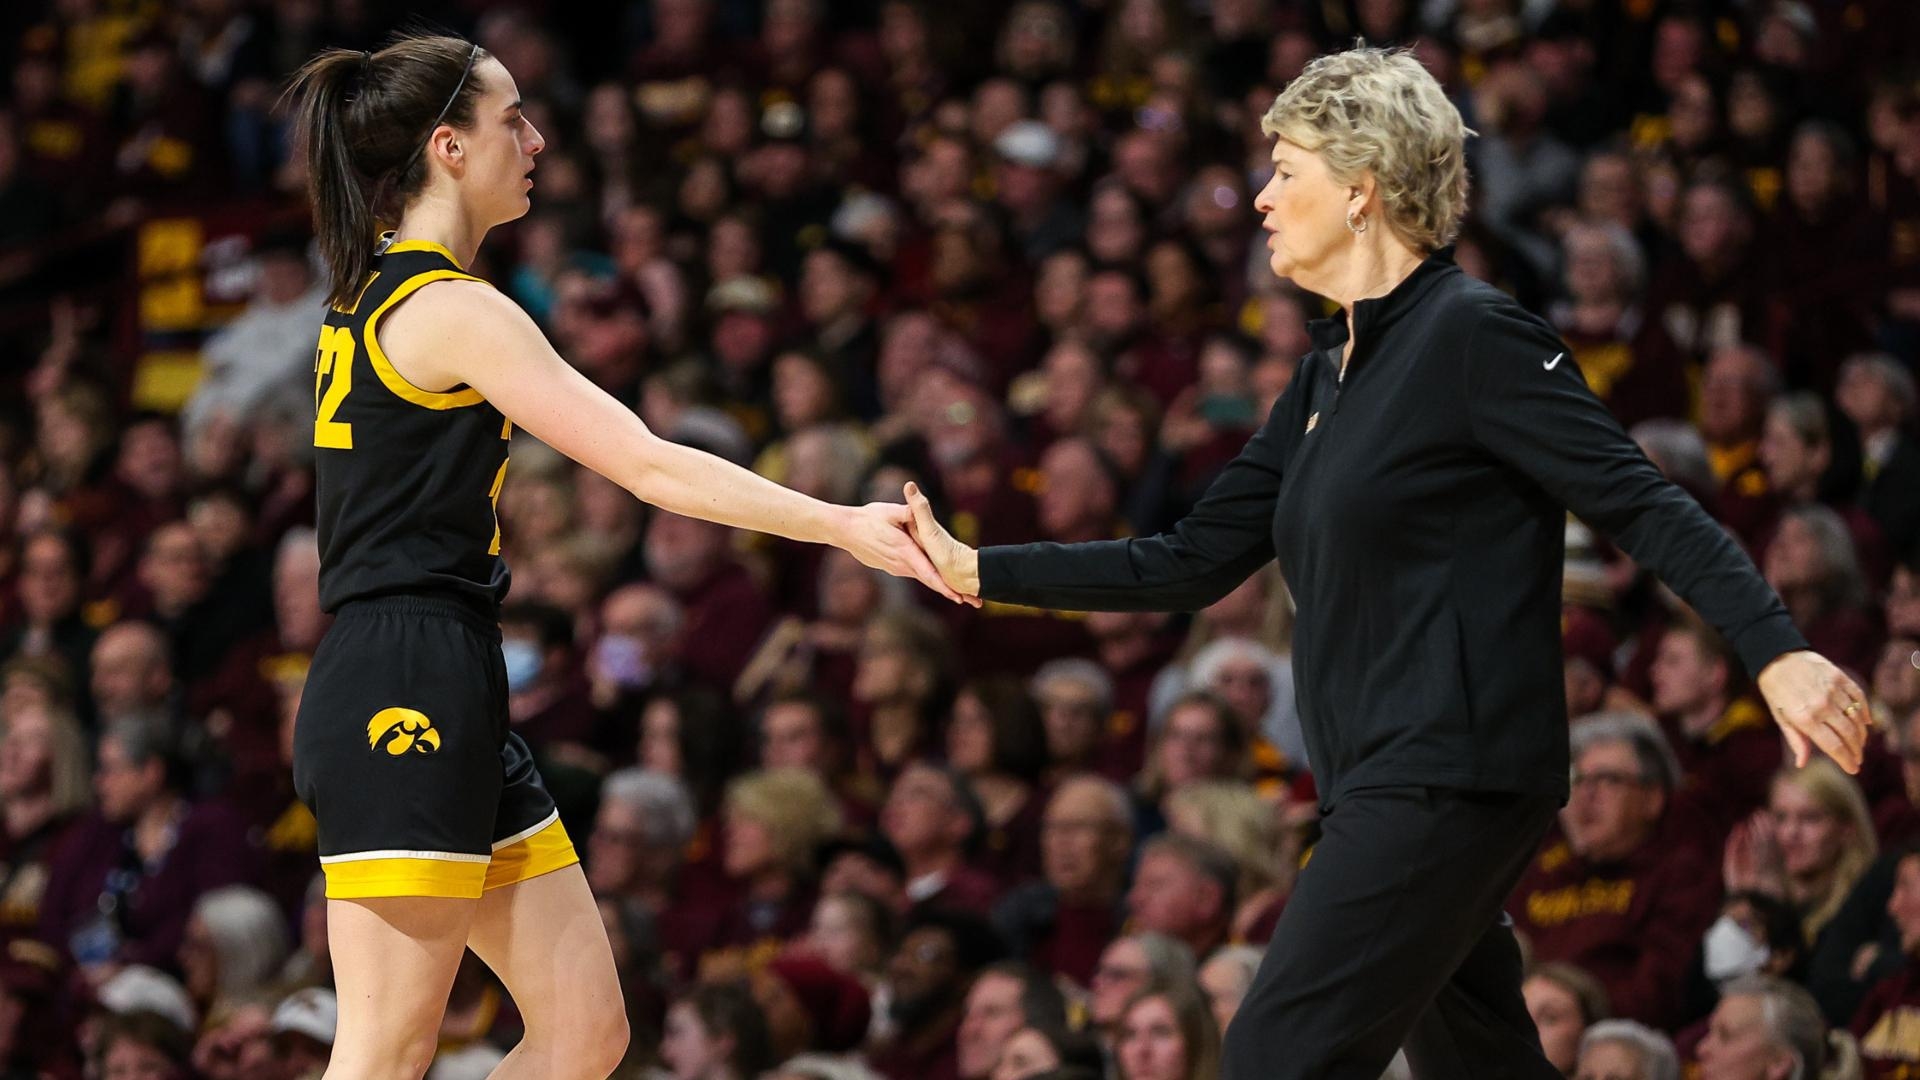 Caitlin Clark's record-breaking night lifts Iowa to 48-point win